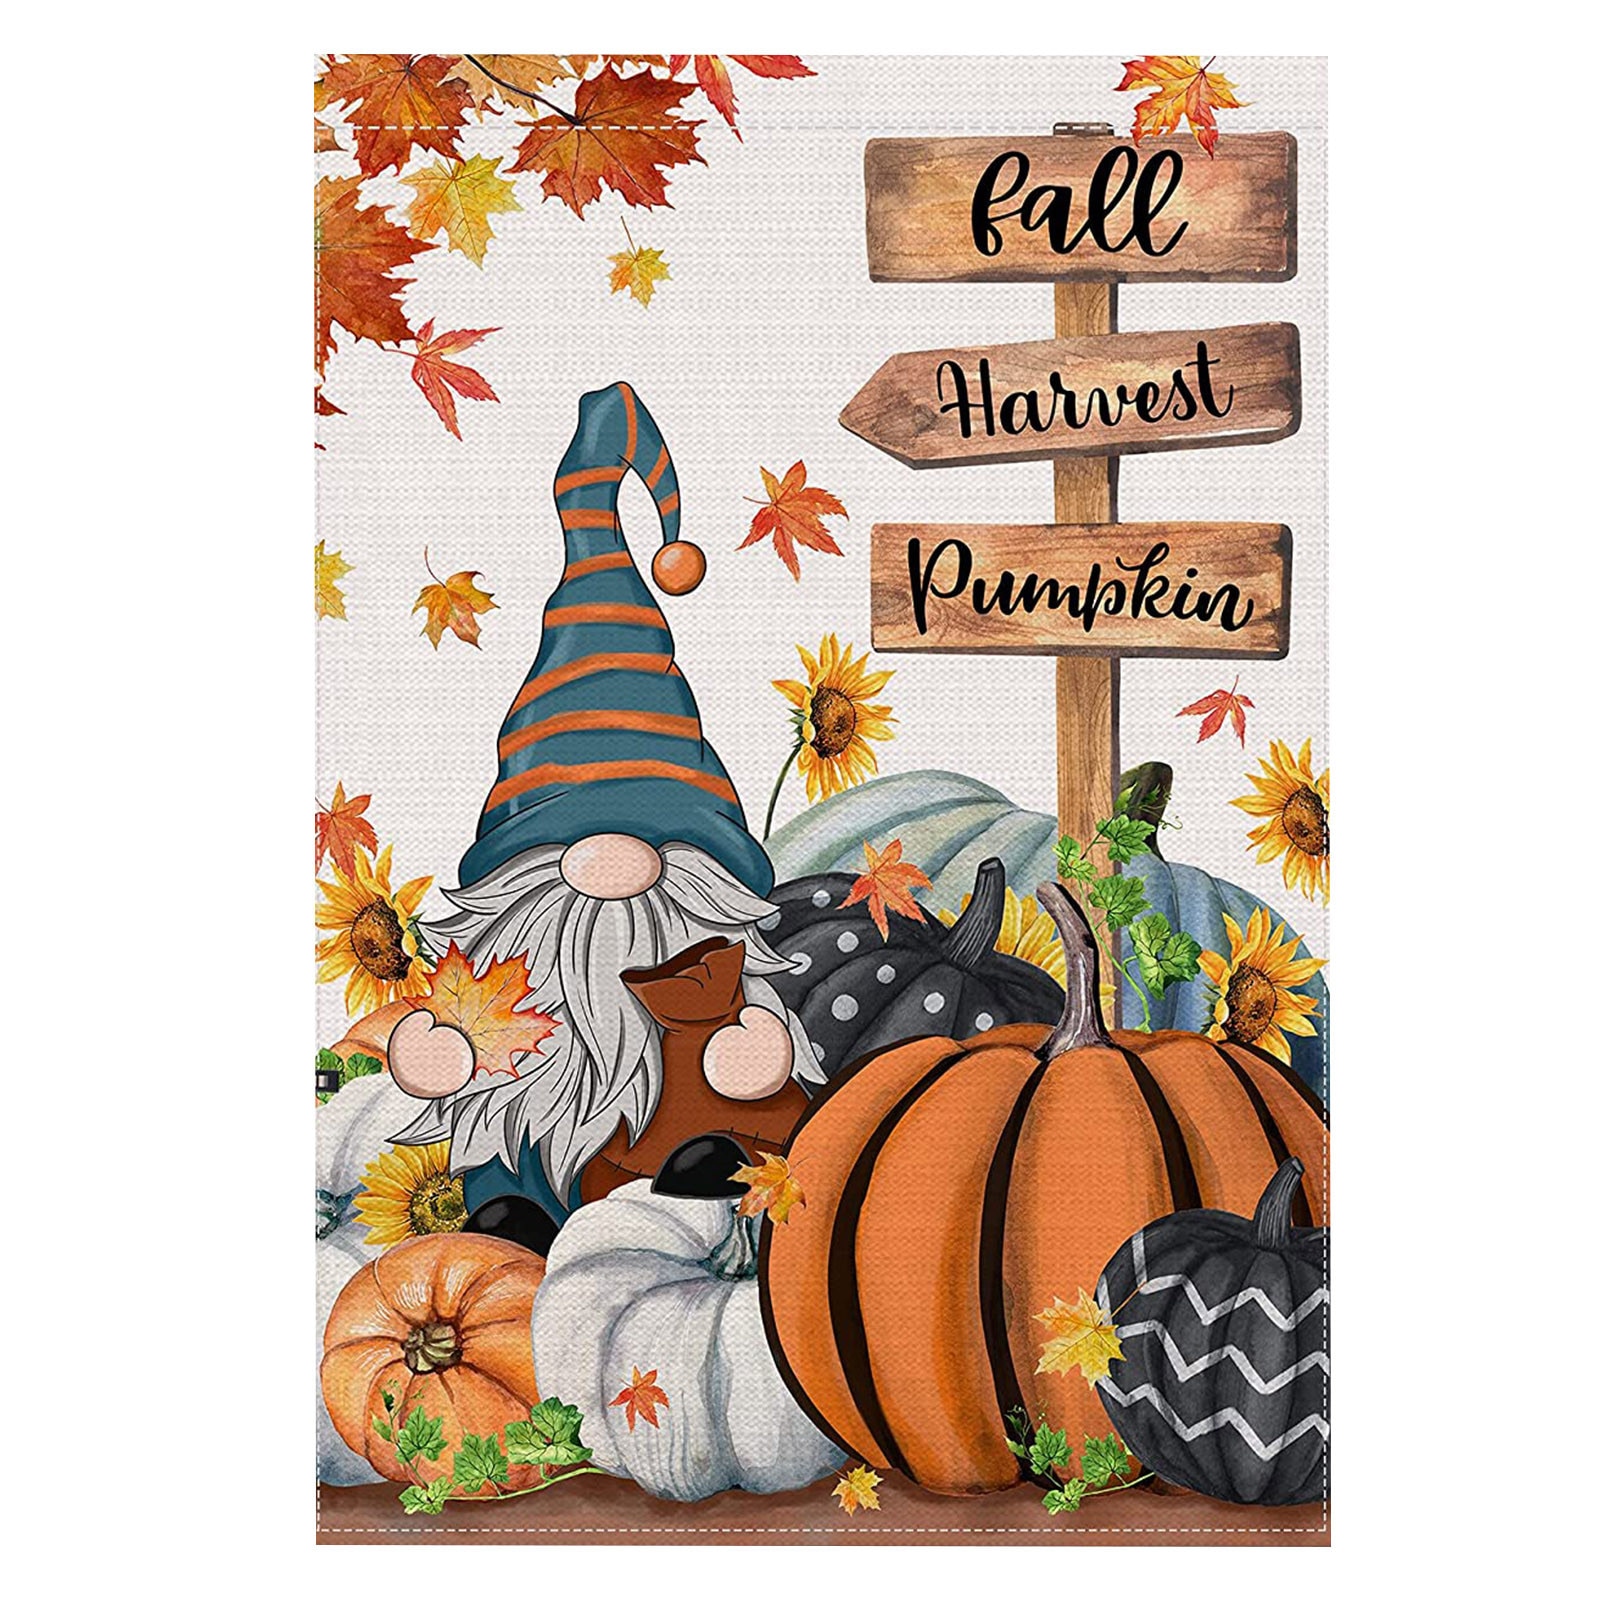 Gnome Fall Garden Flag 12×18 Double Sided, Welcome Fall Autumn Pumpkin Small Garden Flag for Fall Outdoor Yard Seasonal Decors. Address Signs